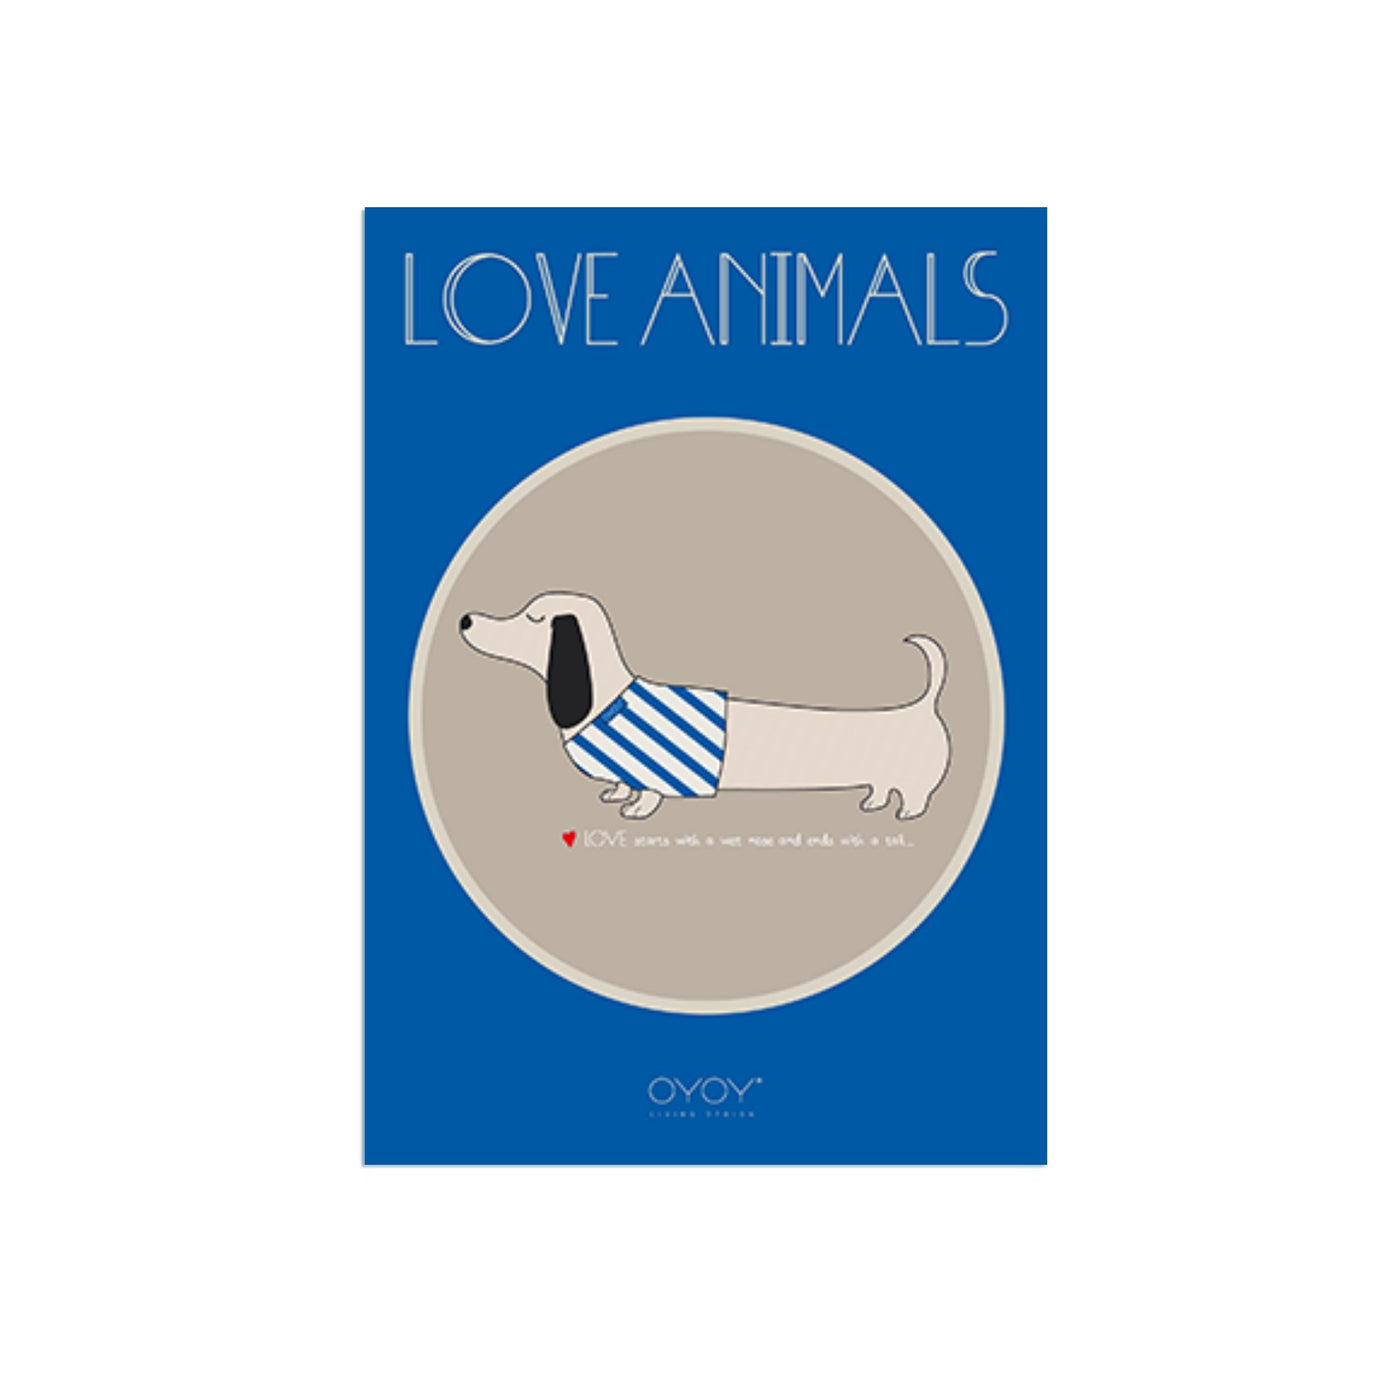 love animals print by OYOY illustrates slinkii the dog and the humorous caption love starts with a wet nose and ends with a tail.